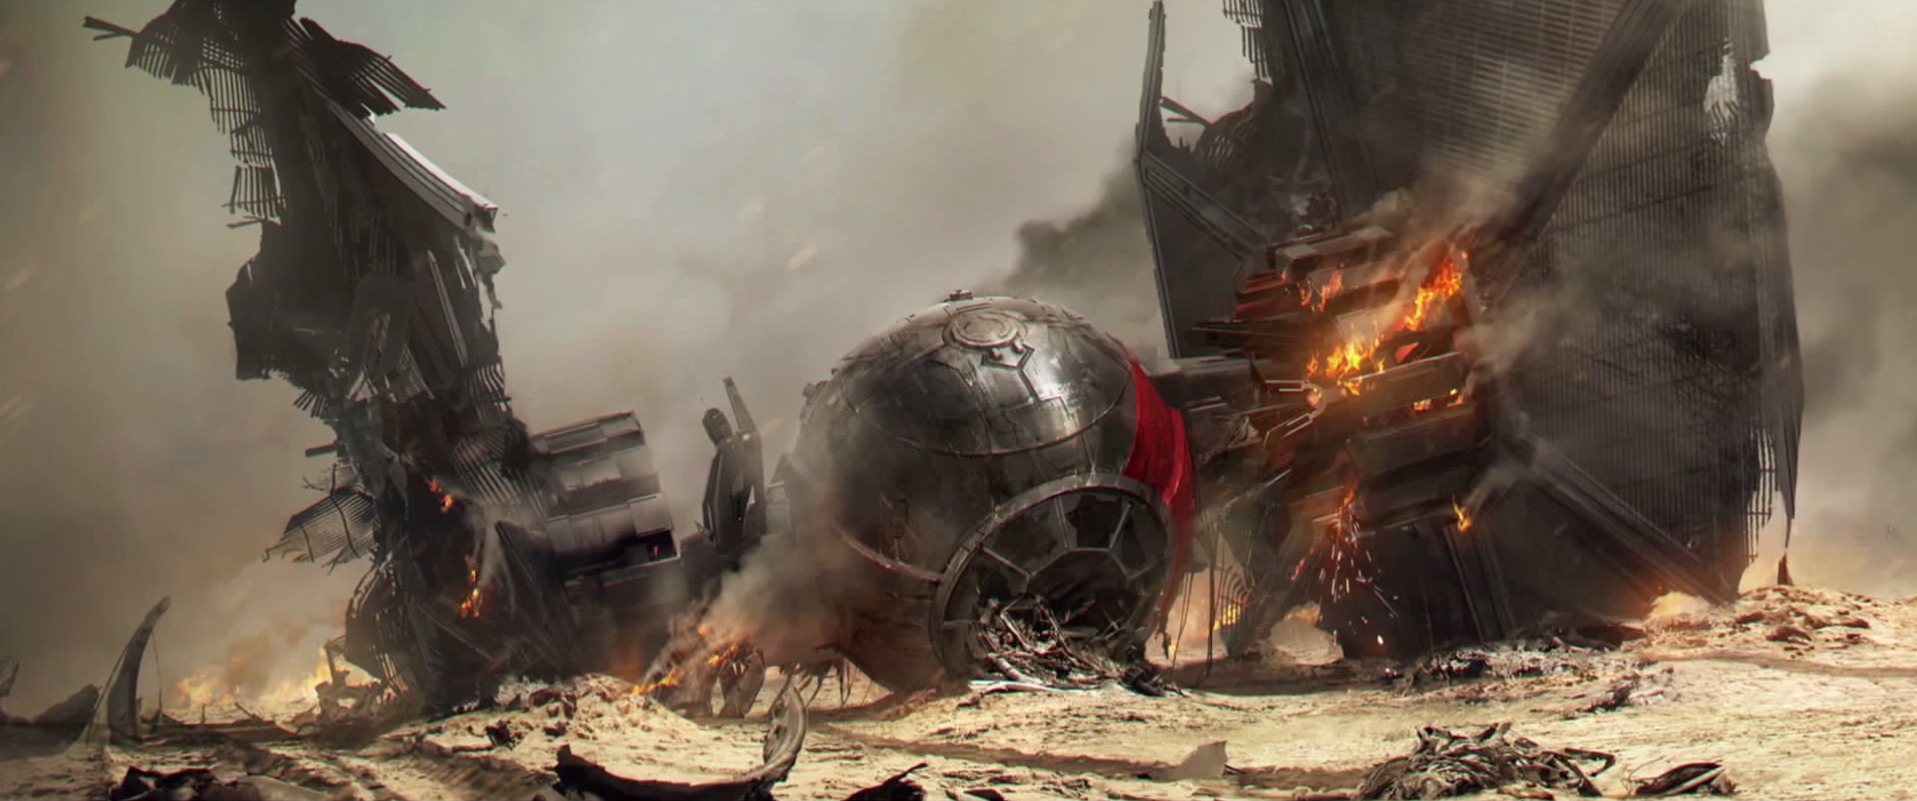 Star Wars: The Force Awakens Comic-Con Footage Analysis